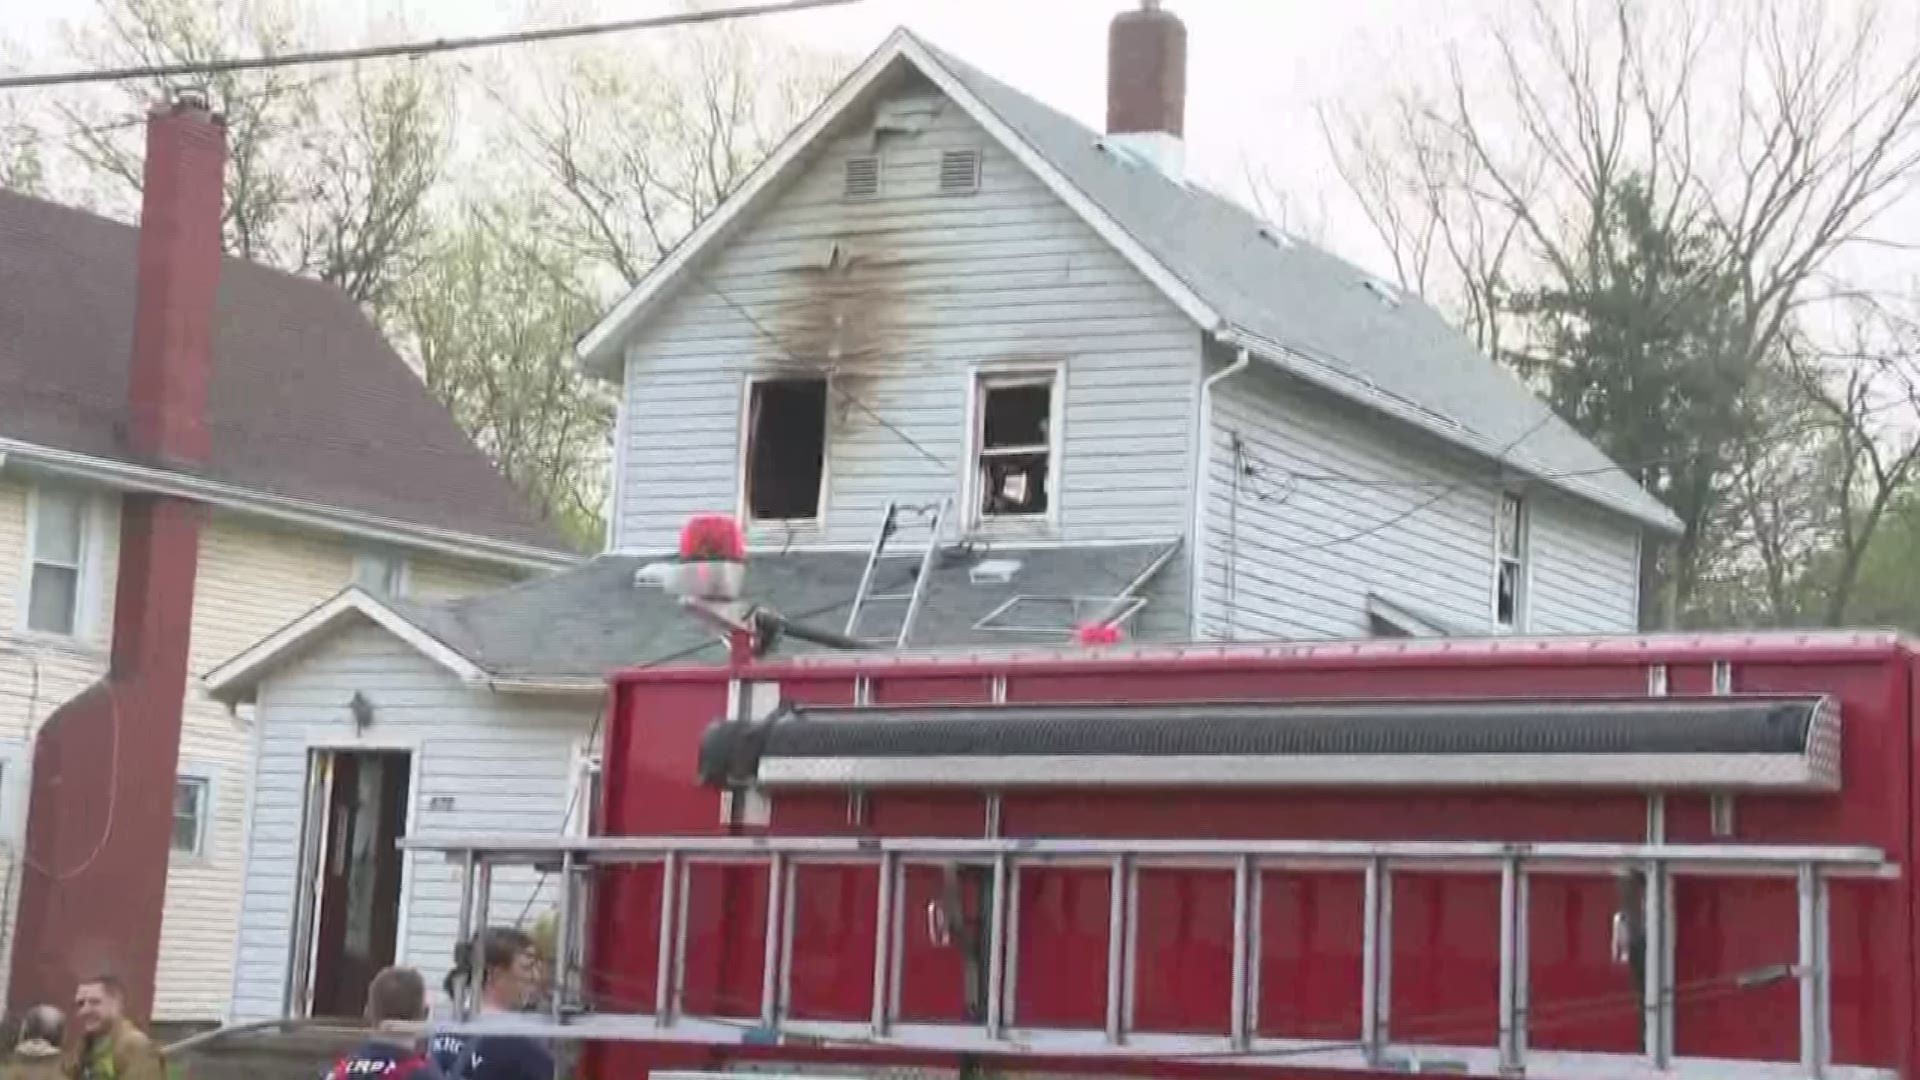 May 7, 2018: The Akron Fire Department says the flames broke out at the residence in the 900 block of Grant Street just before 5 a.m. Monday in a second floor bedroom. Two others were able to escape safely, and the Red Cross has been notified to assist th